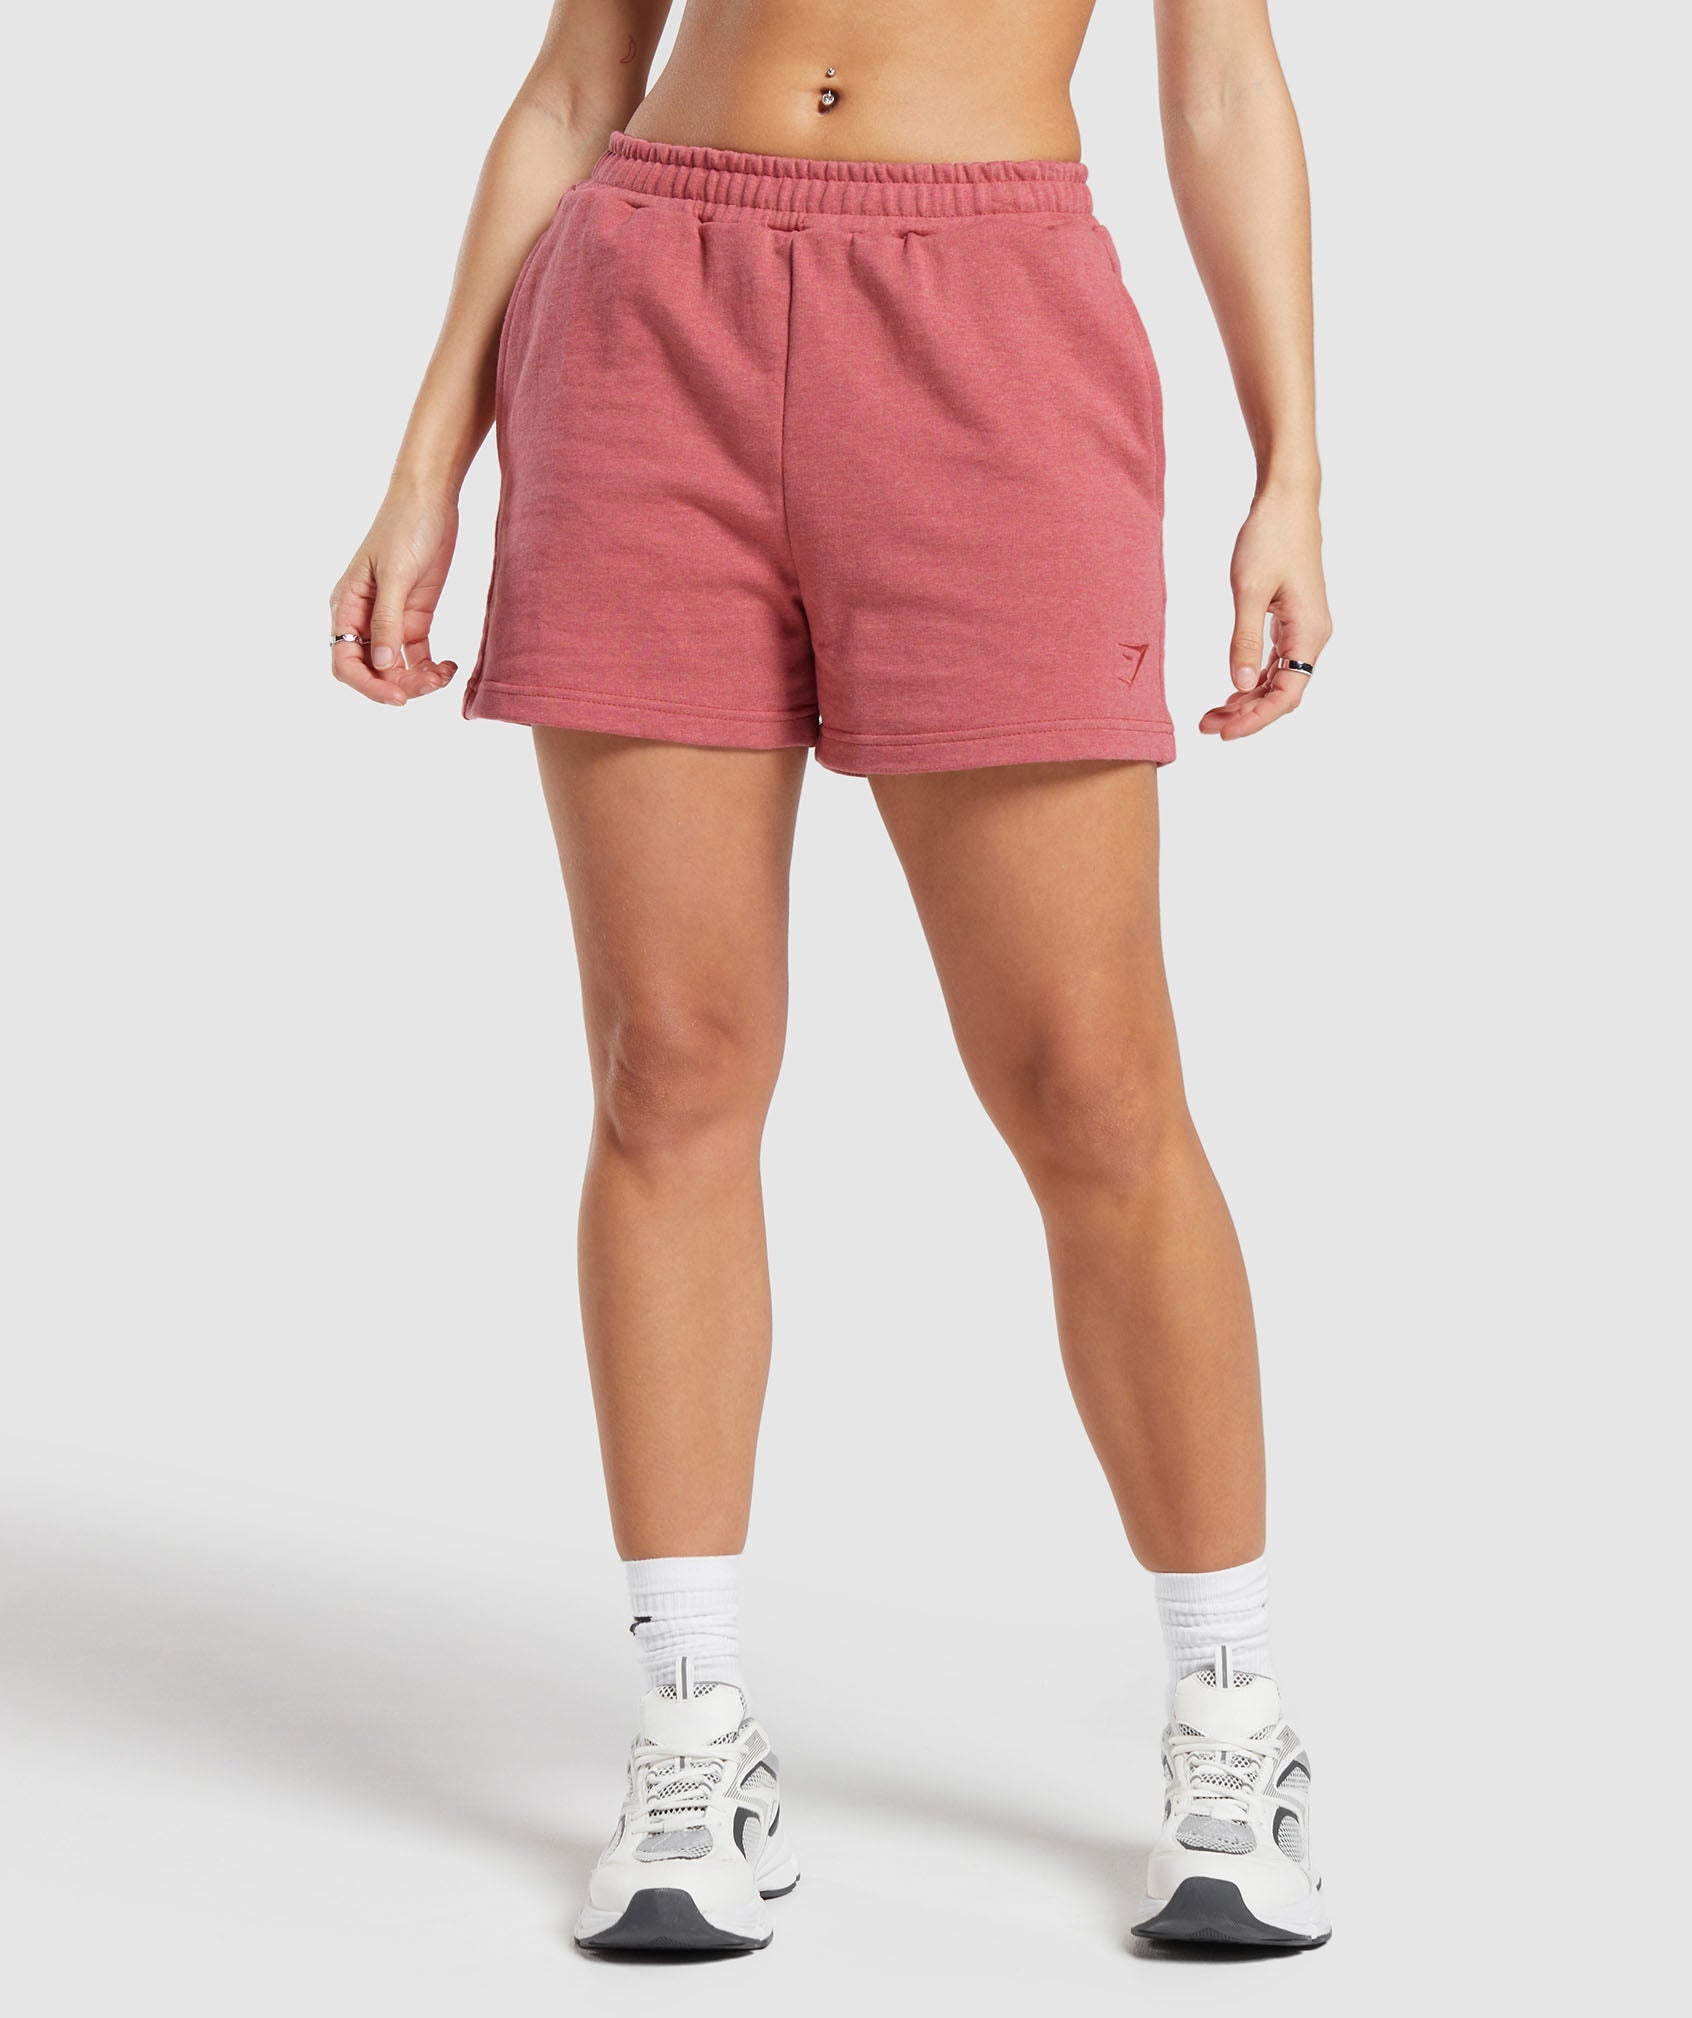 Rest Day Sweat Shorts dans Heritage Pink Marl